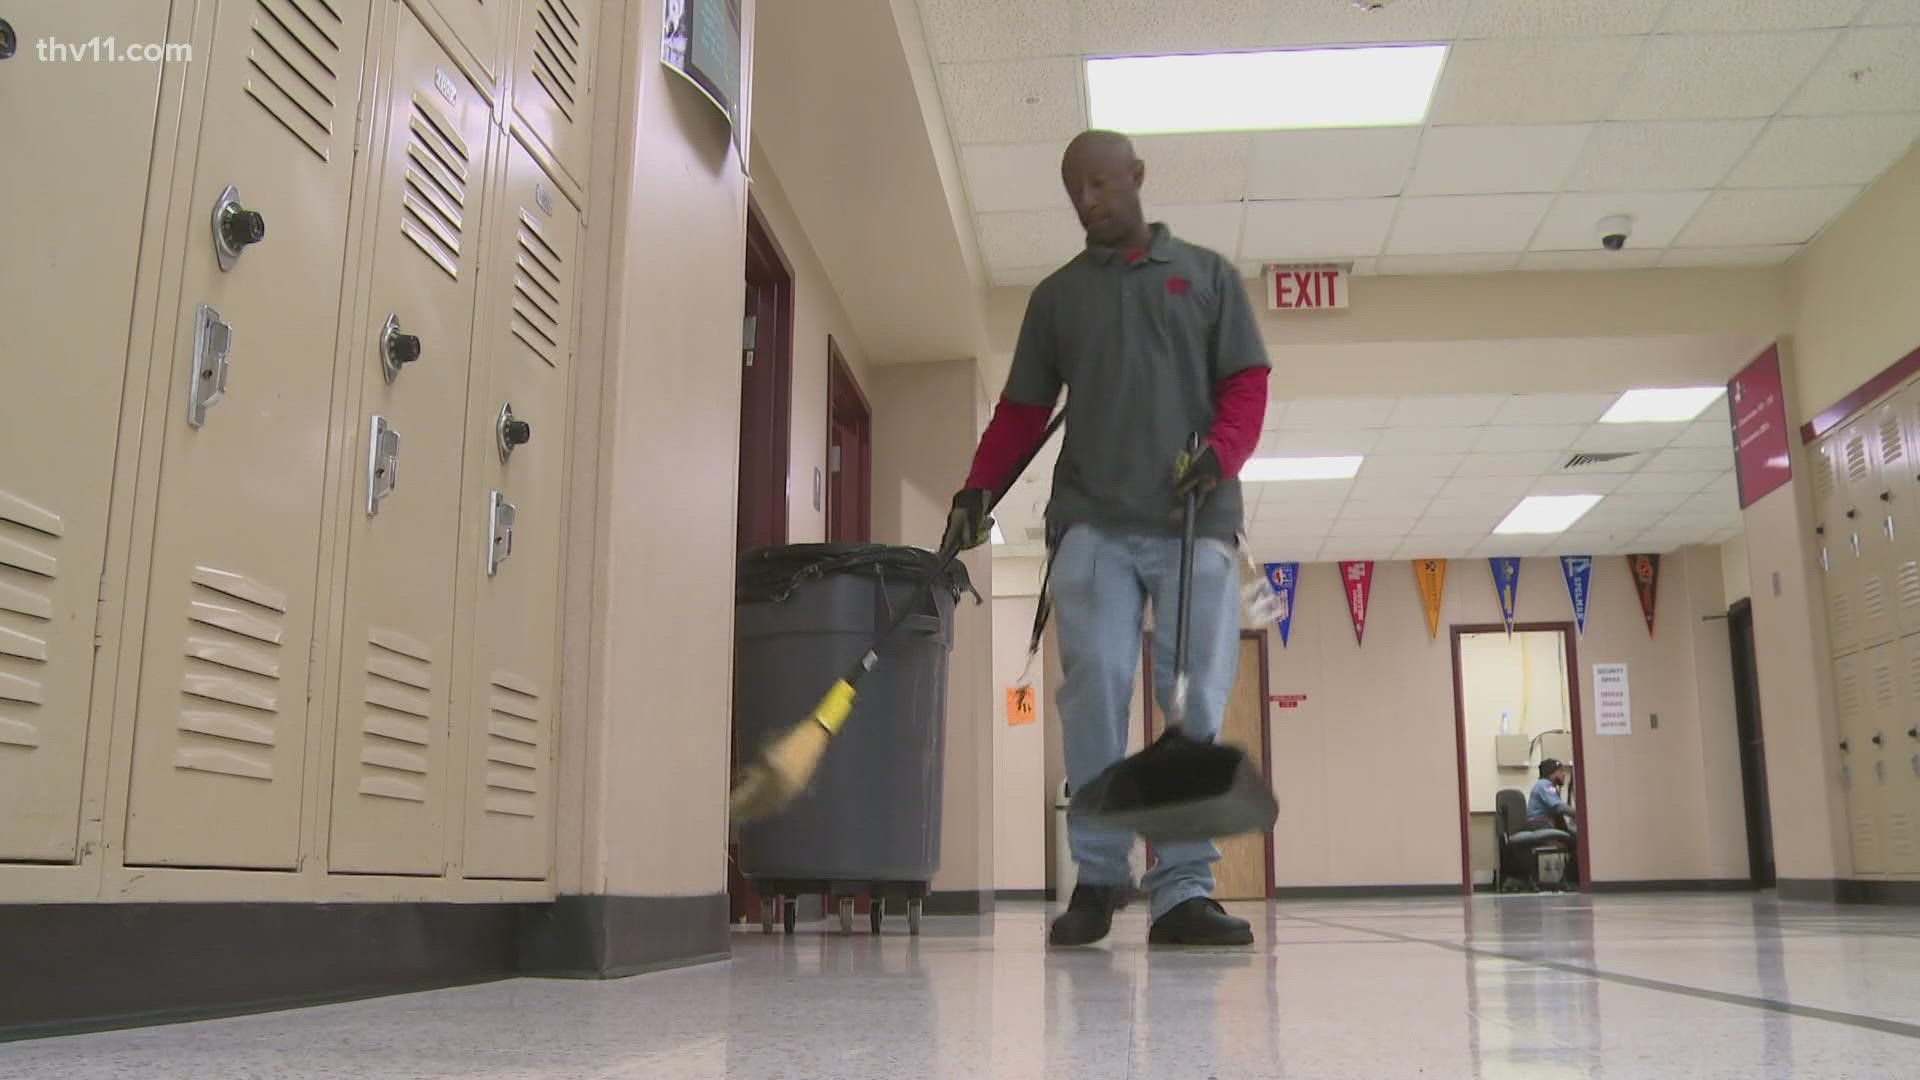 A Texas custodian is back on the job after a serious battle with COVID. Shawn Lewis spent 45 days in the hospital and lost 50 pounds from the fight.